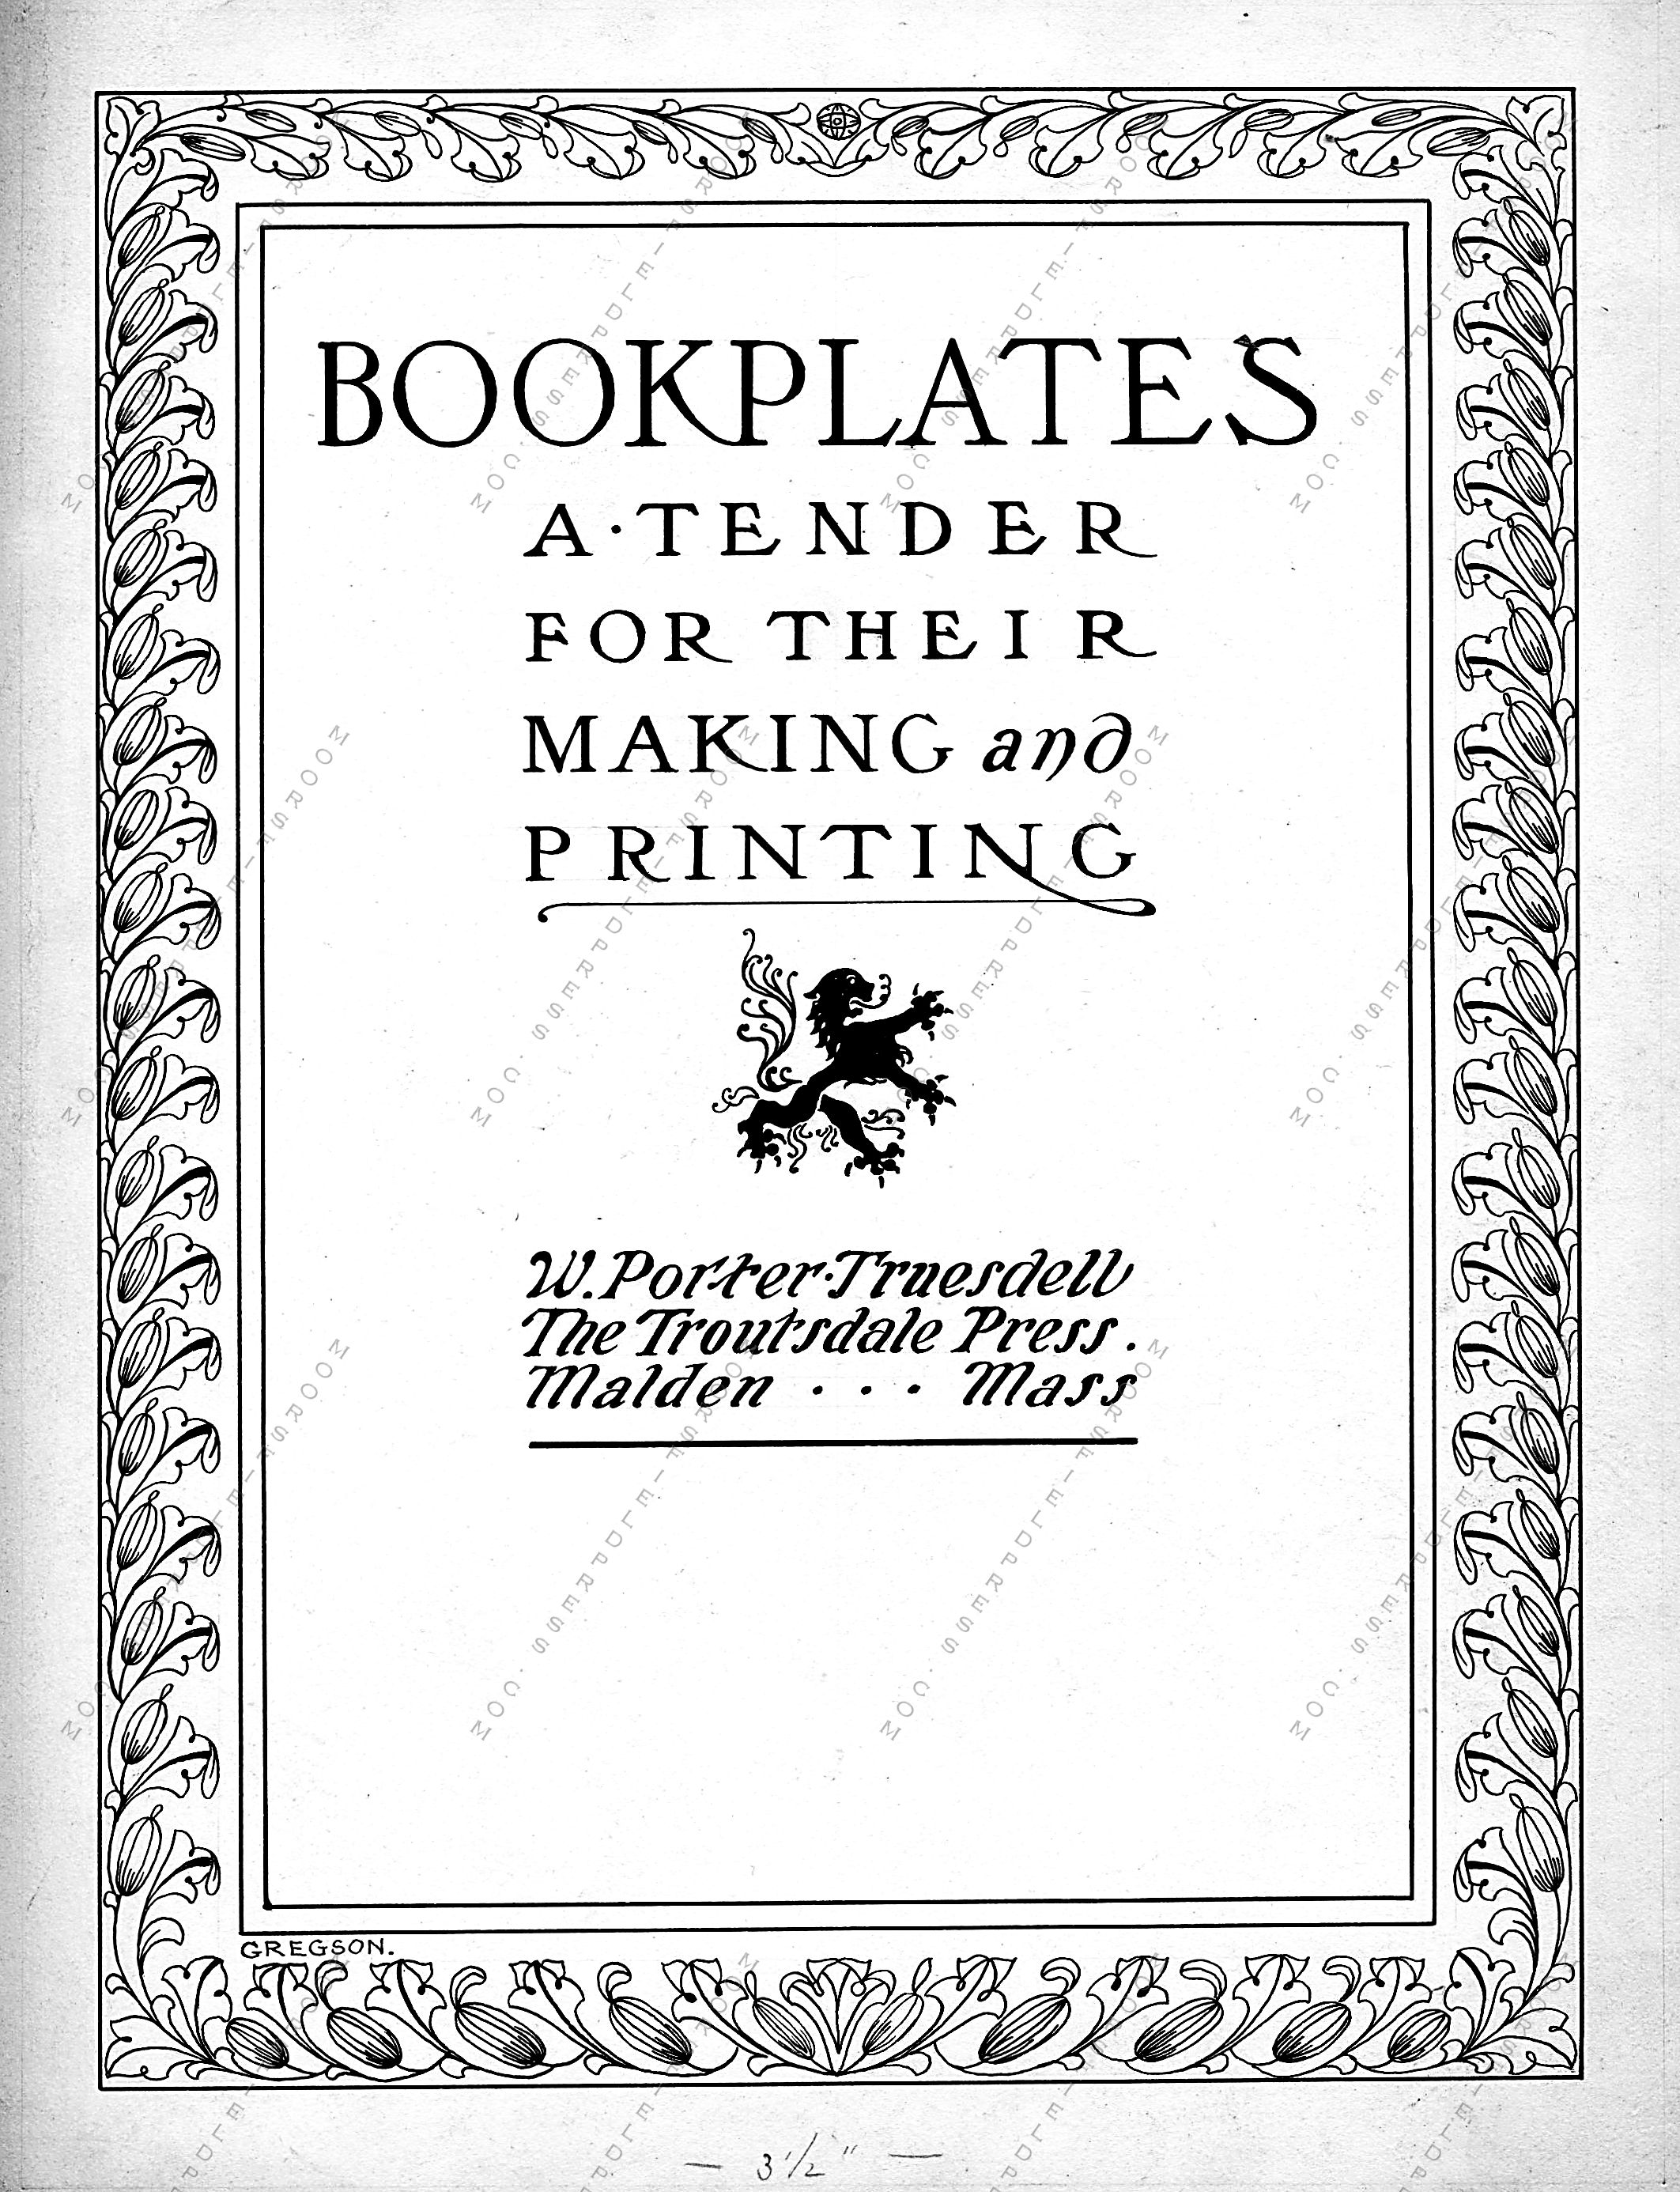 Winfred Porter
              Truesdell and his Book Plate Books and Single Book Plates